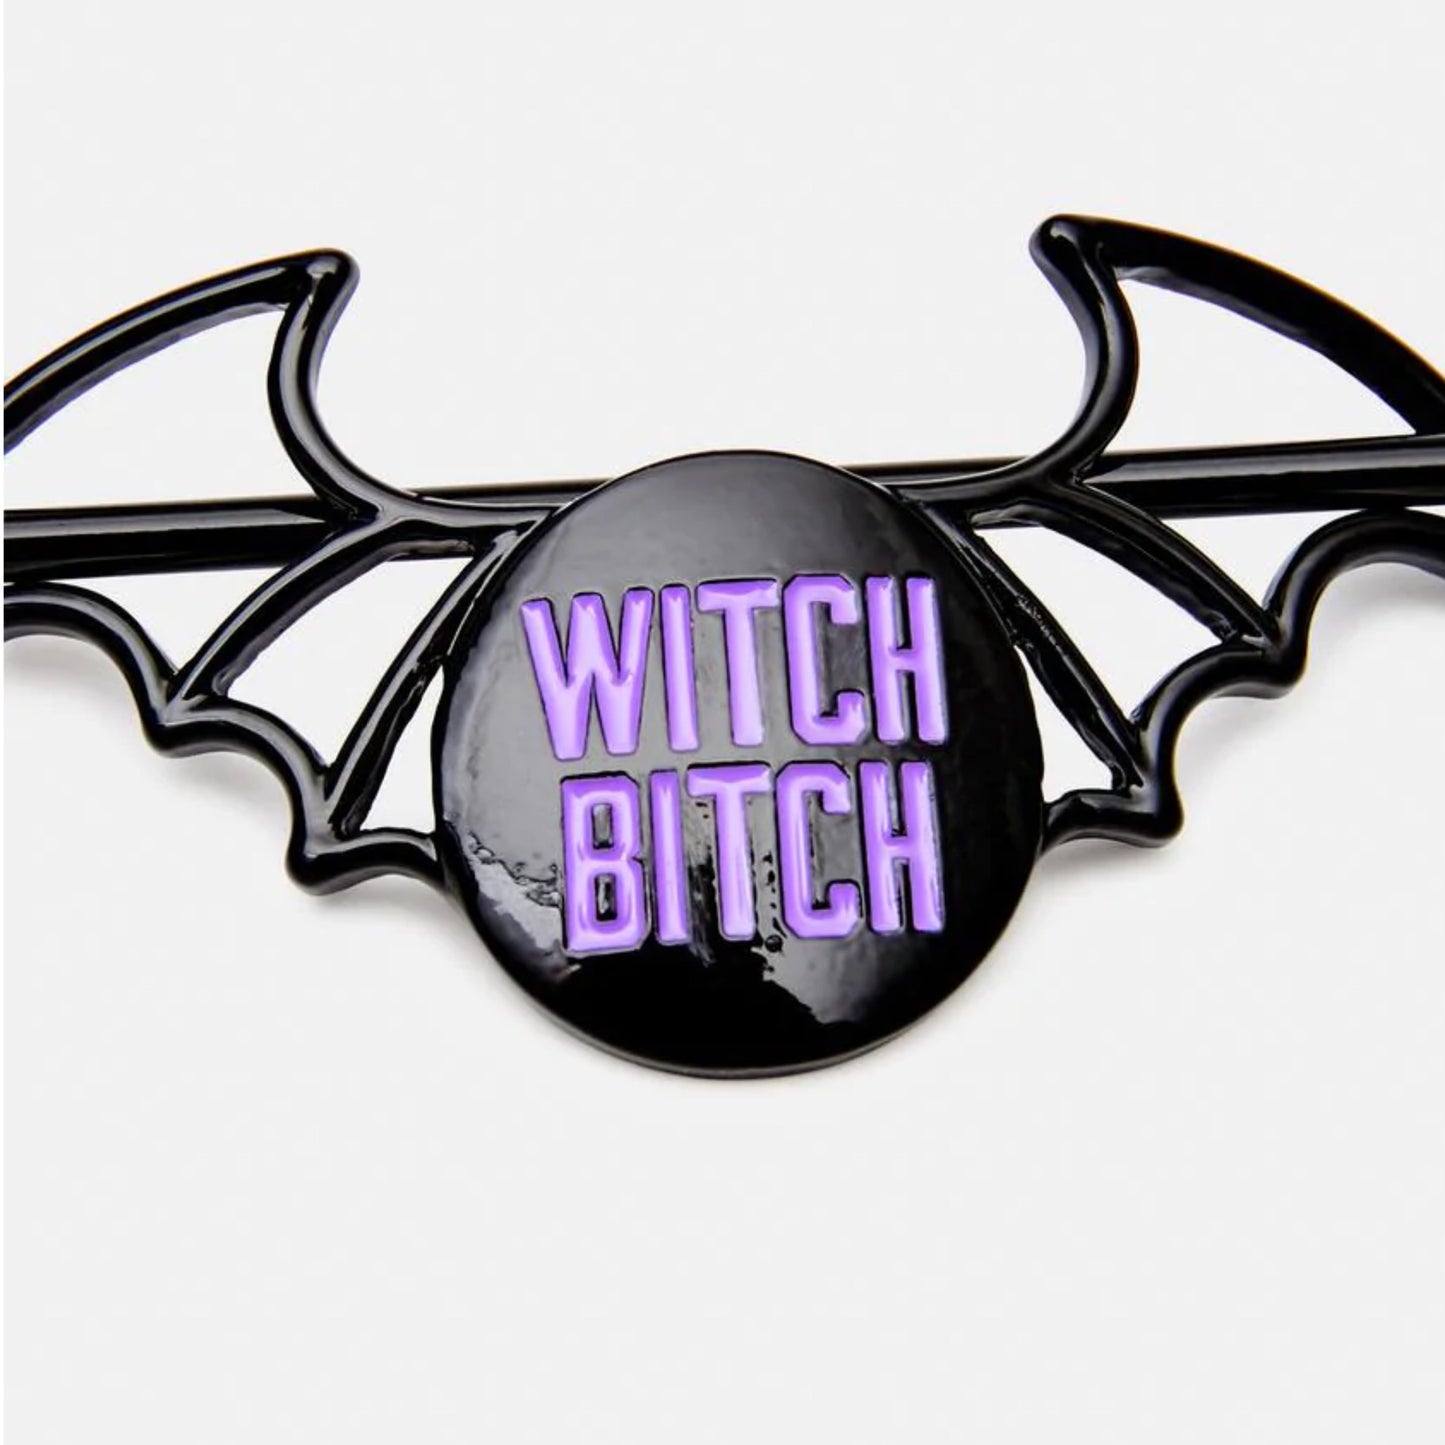 Witch Bitch Hair Pin | Black Bat Shape With "Witch Bitch" Printed on Top - Dolls Kill - Hair Pin